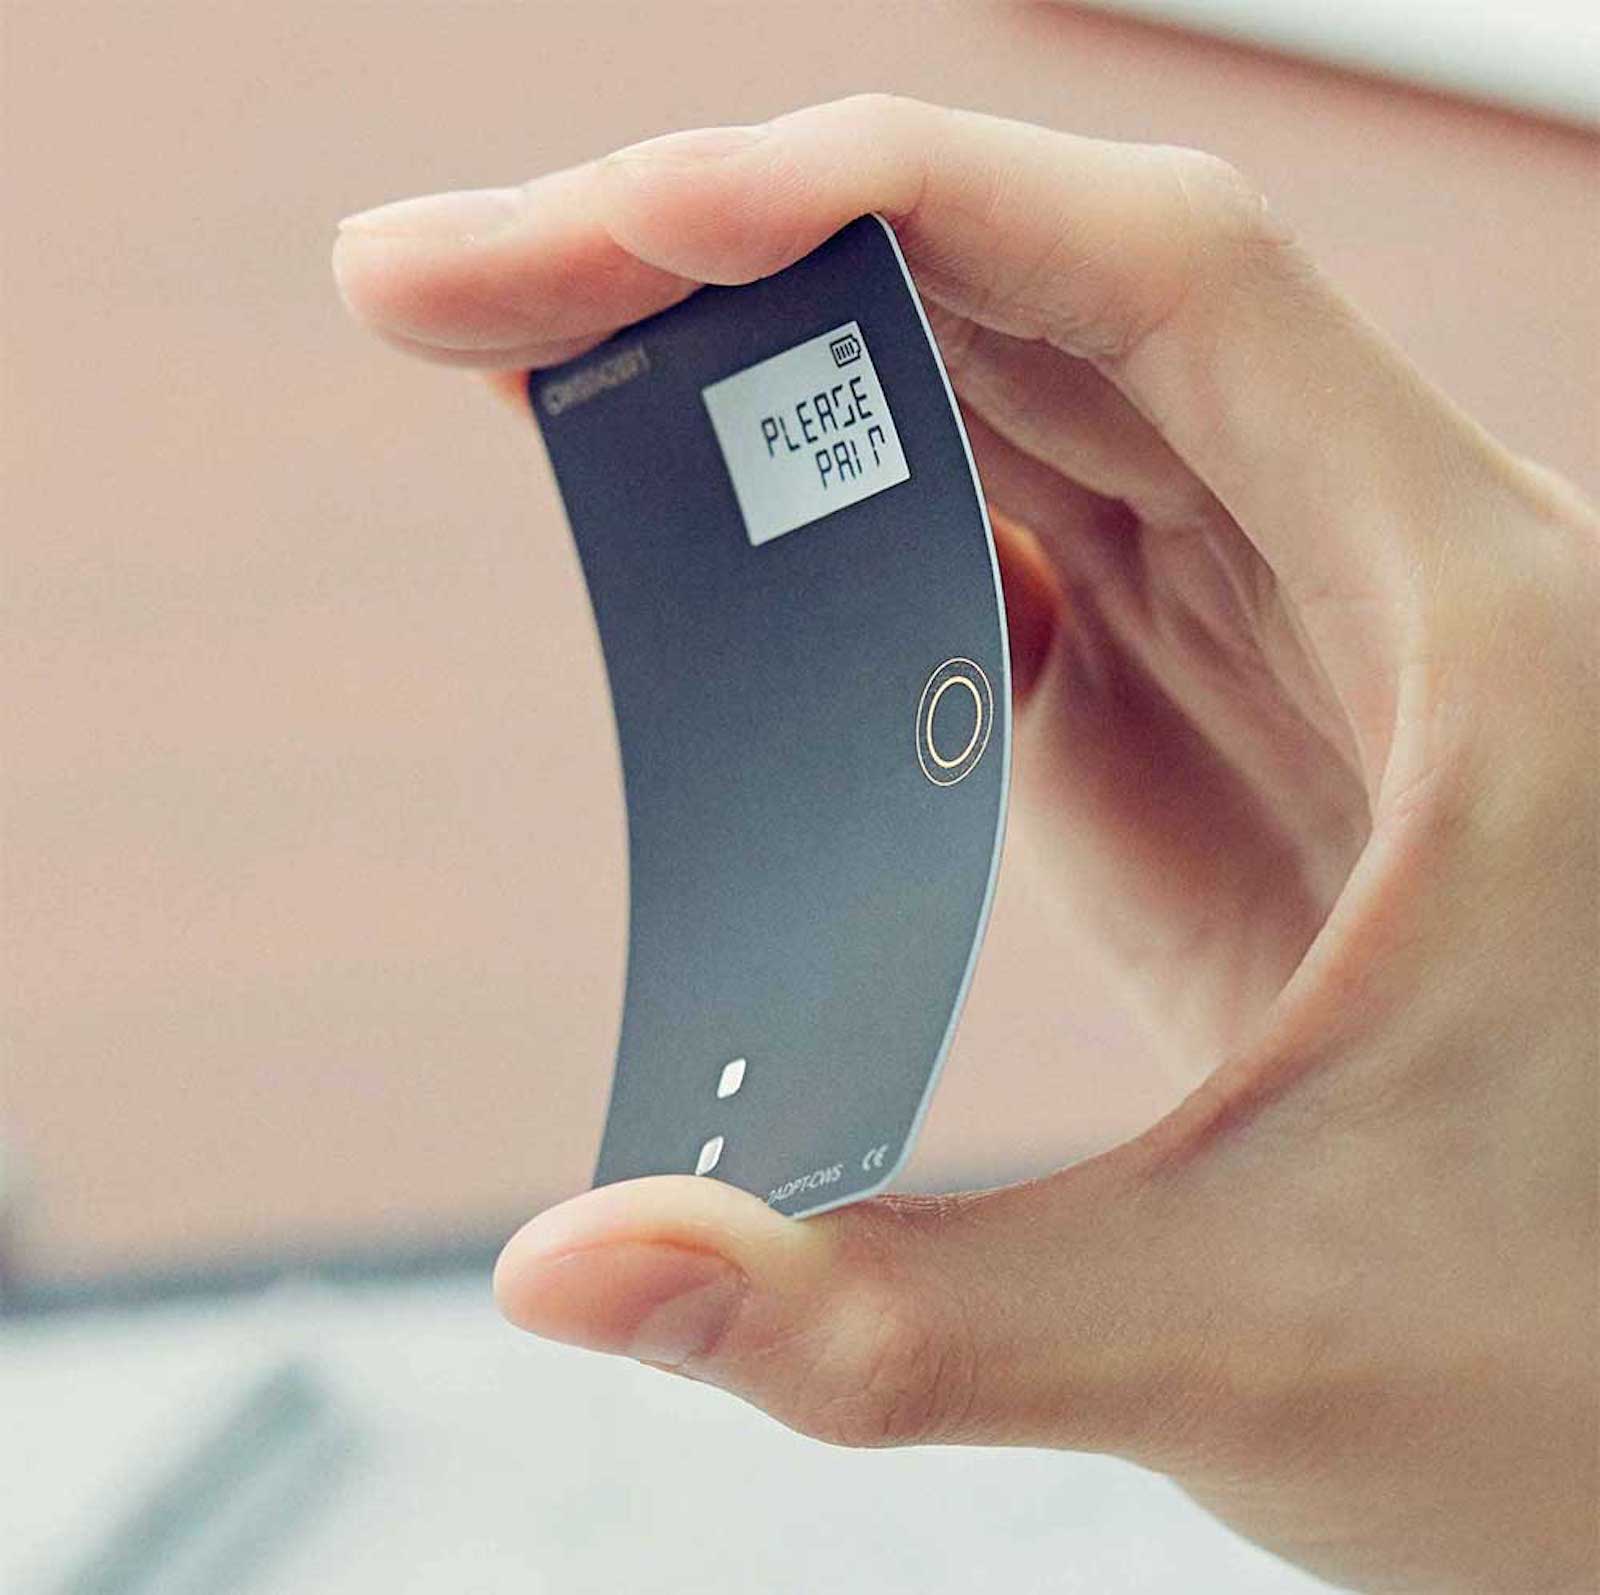 How To Choose The Best Hardware Wallet?